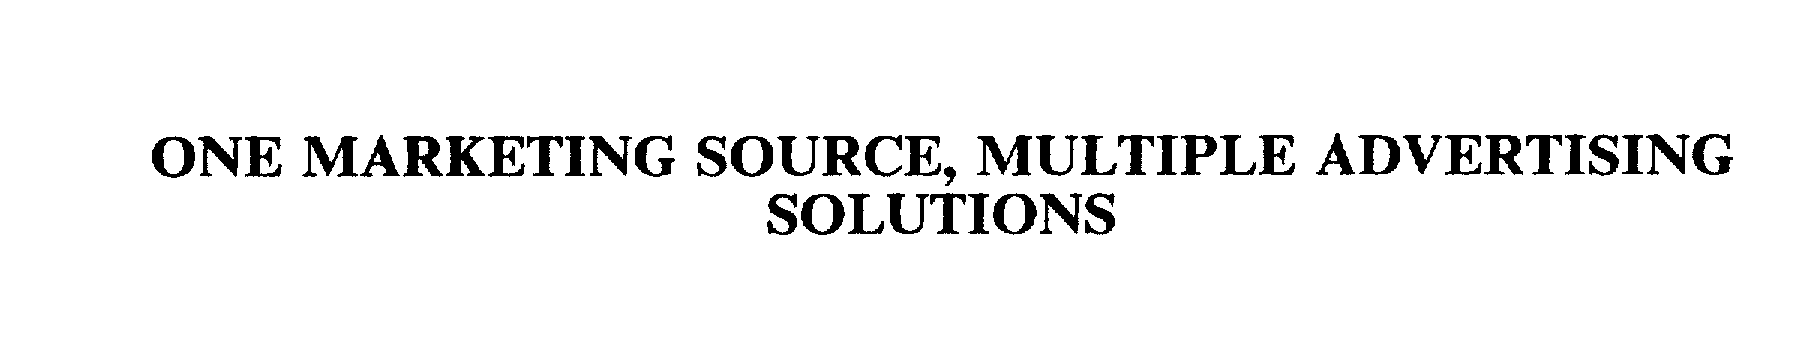 Trademark Logo ONE MARKETING SOURCE, MULTIPLE ADVERTISING SOLUTIONS